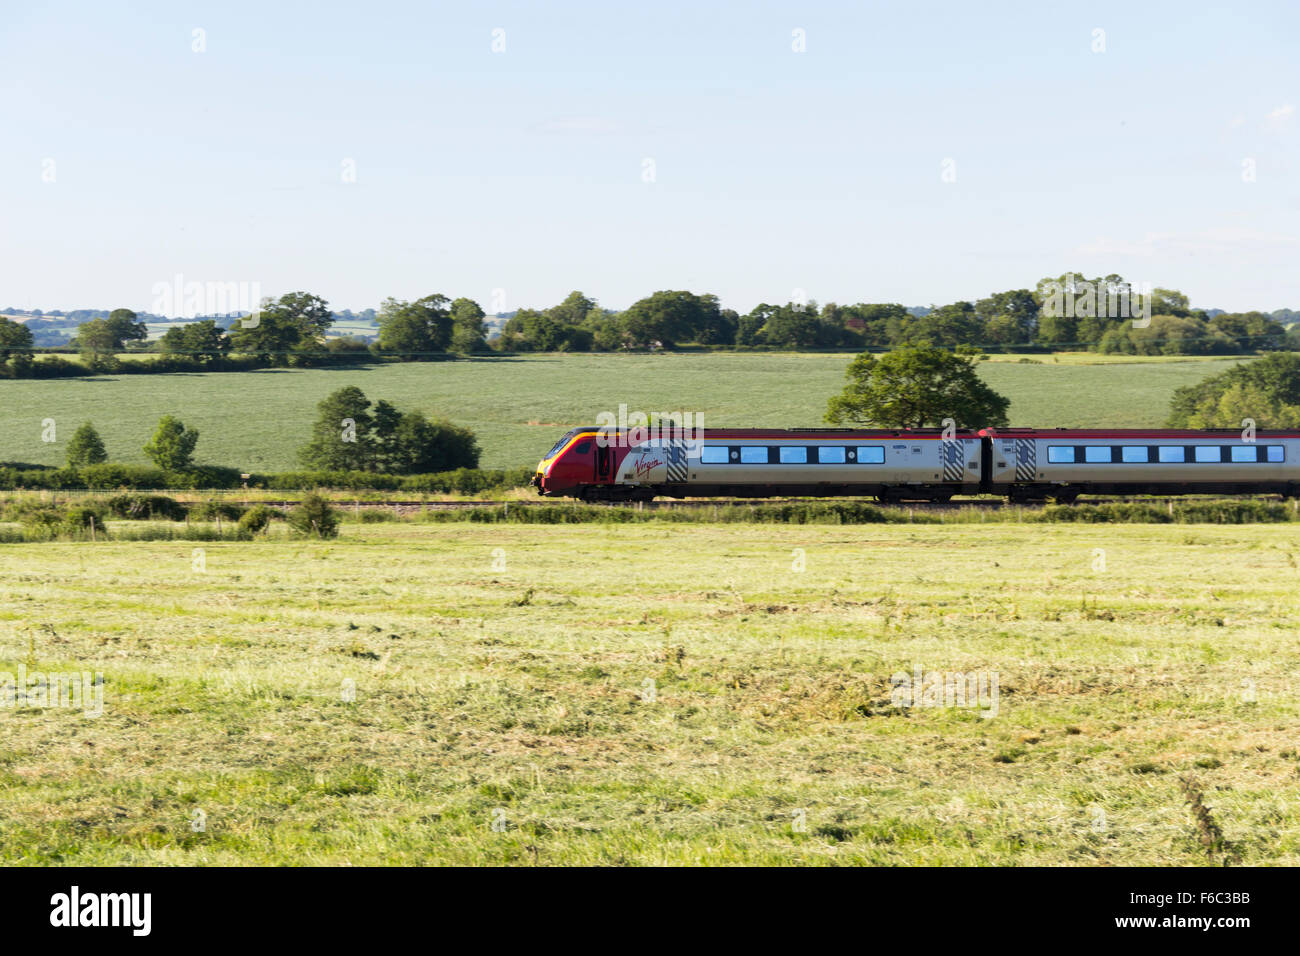 A class 221 Virgin Voyager four coach express train passes though open countryside near Beeston, Cheshire heading west Stock Photo